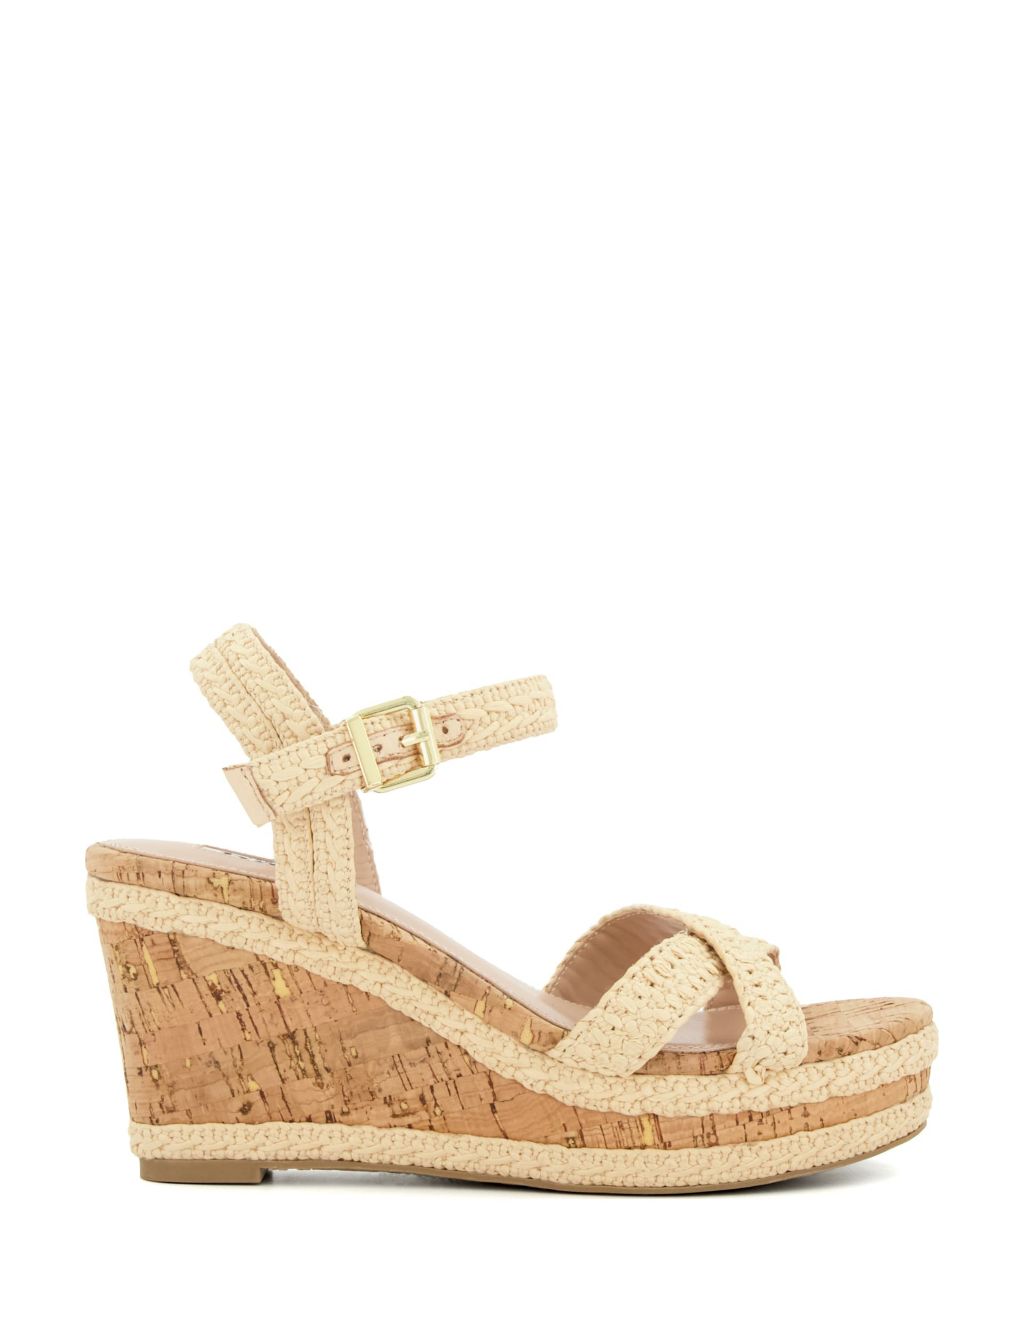 Woven Crossover Ankle Strap Wedge Sandals image 1